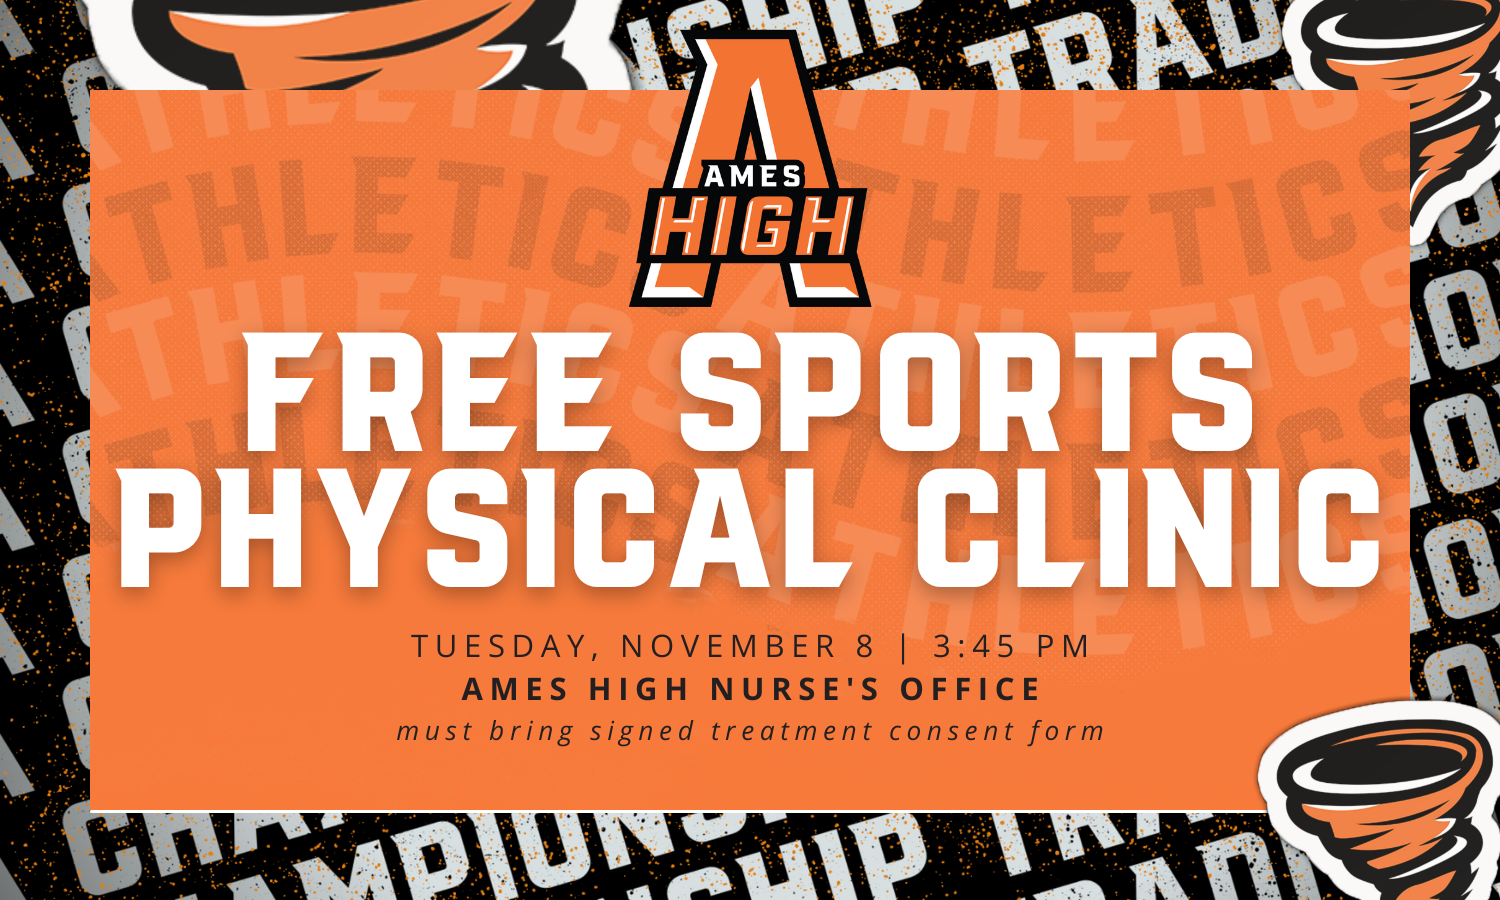 Ames High to host free sports physical clinic